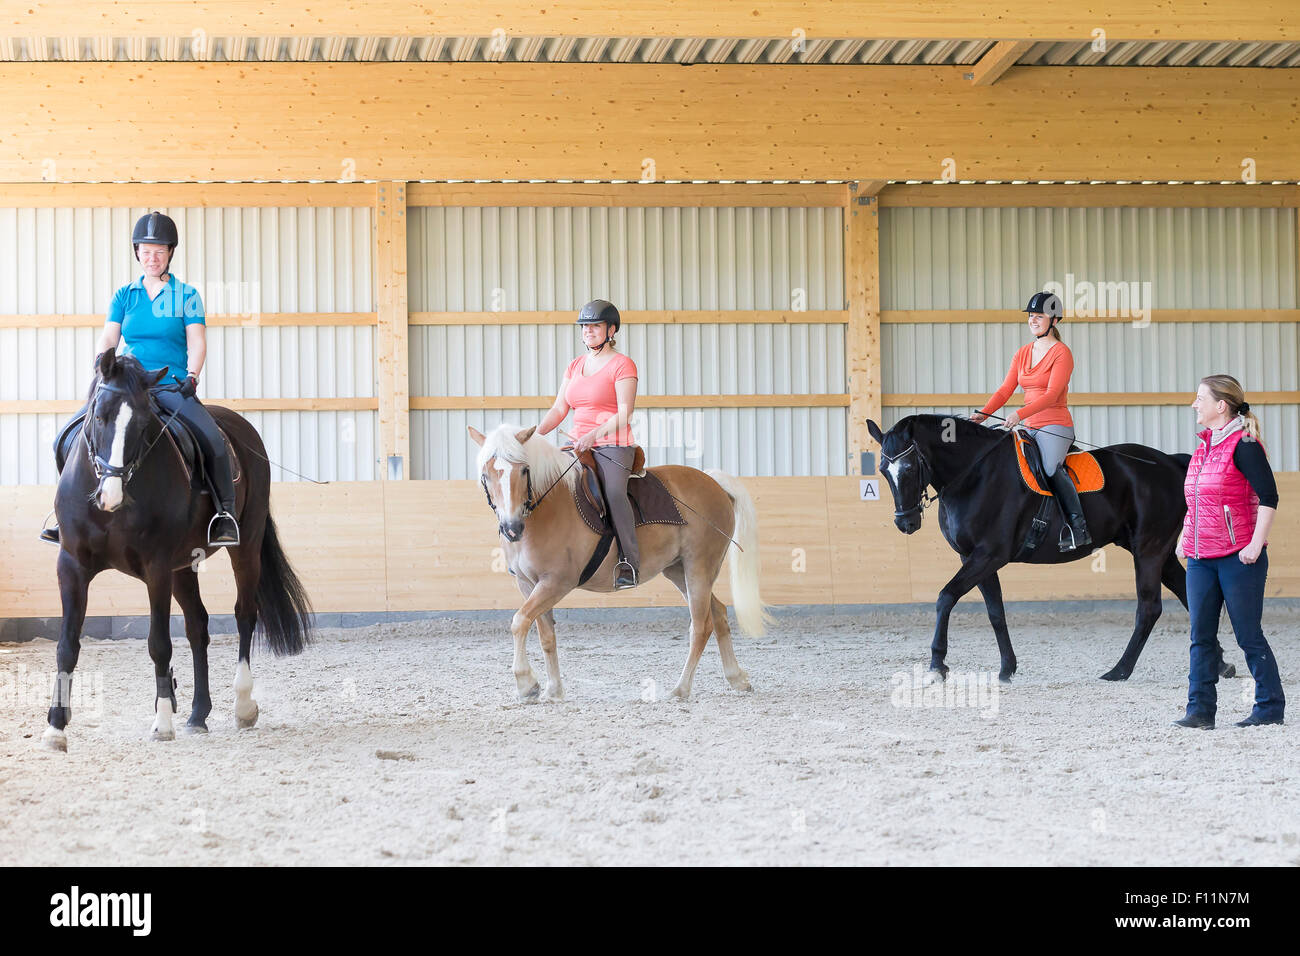 Riding lesson in a riding hall Stock Photo